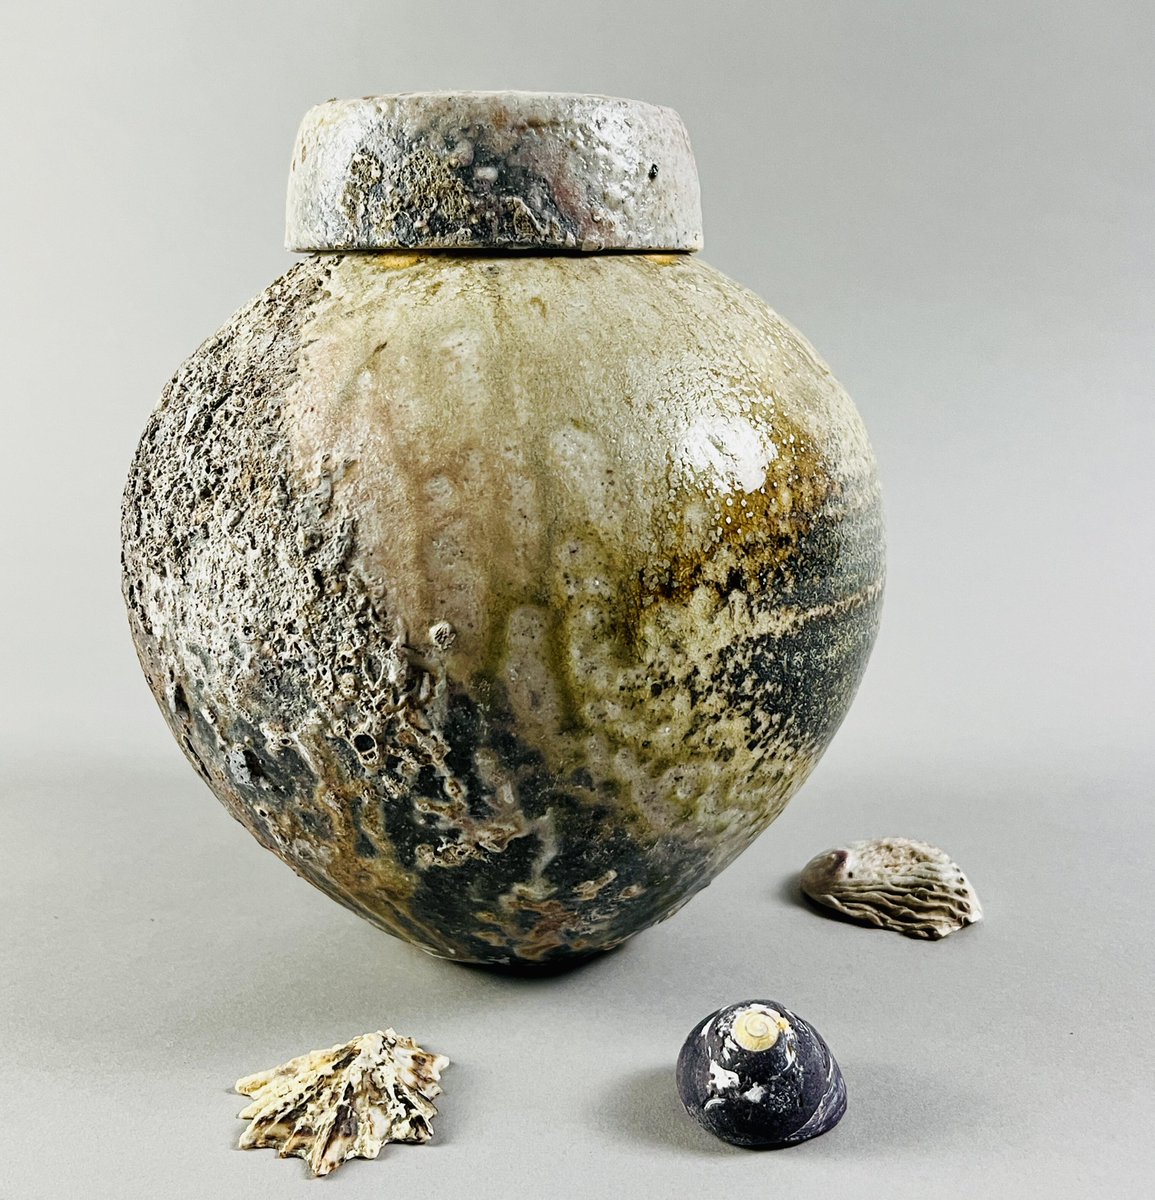 Today’s 'Pic of the Day' is a pot by Harriet Coleridge (Artweeks listing 407; artweeks.org/v/harriet-cole…). She is opening Ewelme pottery during the South Oxfordshire week of the festival (18th-27th May). See more great art and plan venues to visit at artweeks.org